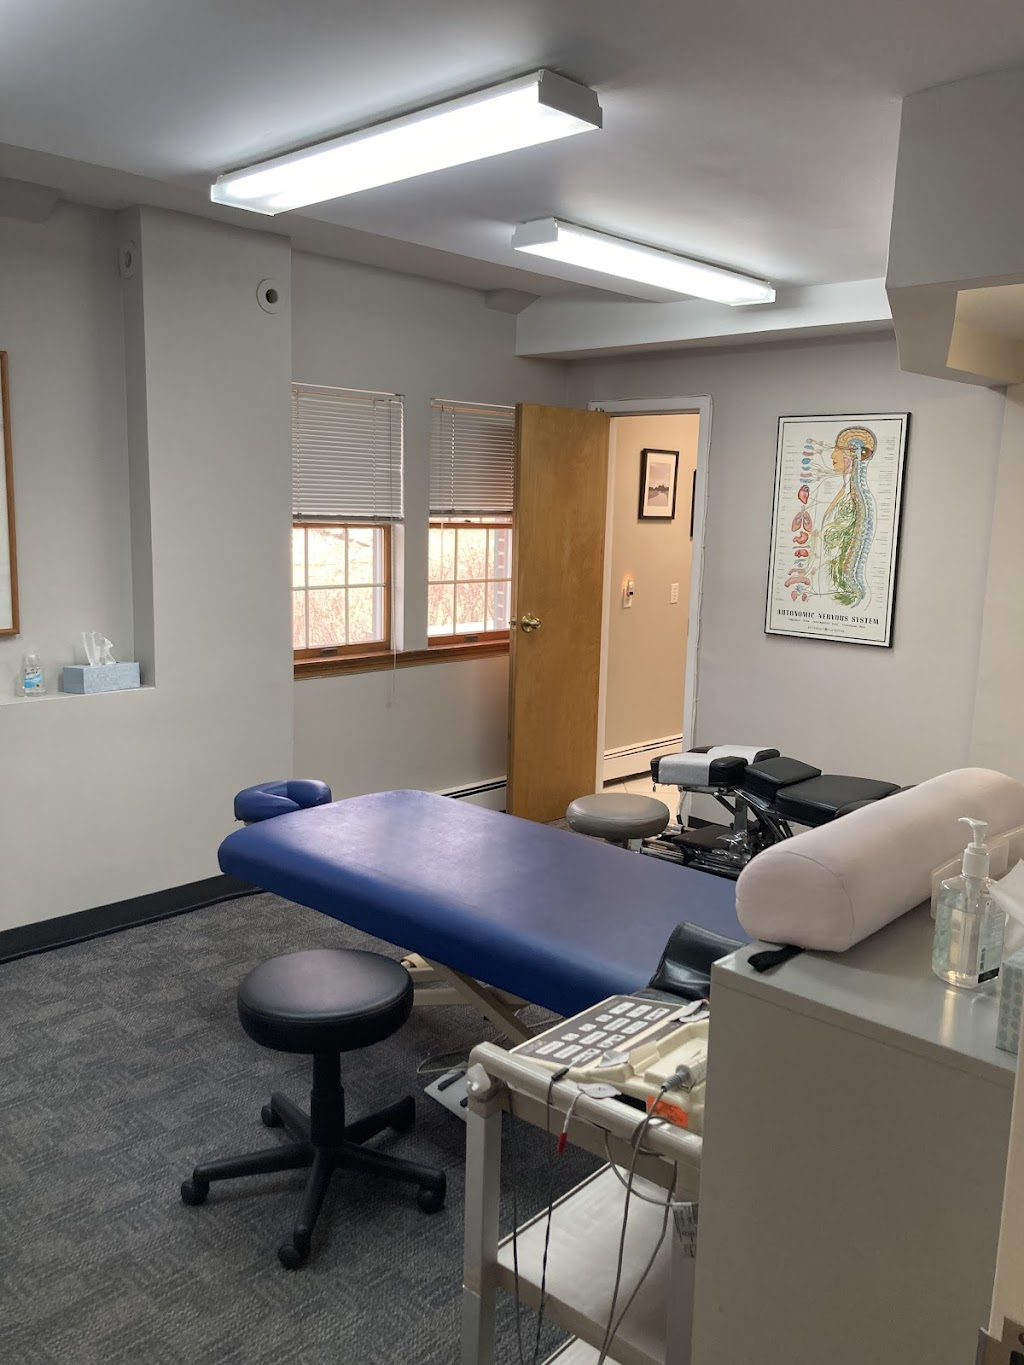 Somers Chiropractic Center | 322 NY-100, Somers, NY 10589 | Phone: (914) 276-2225